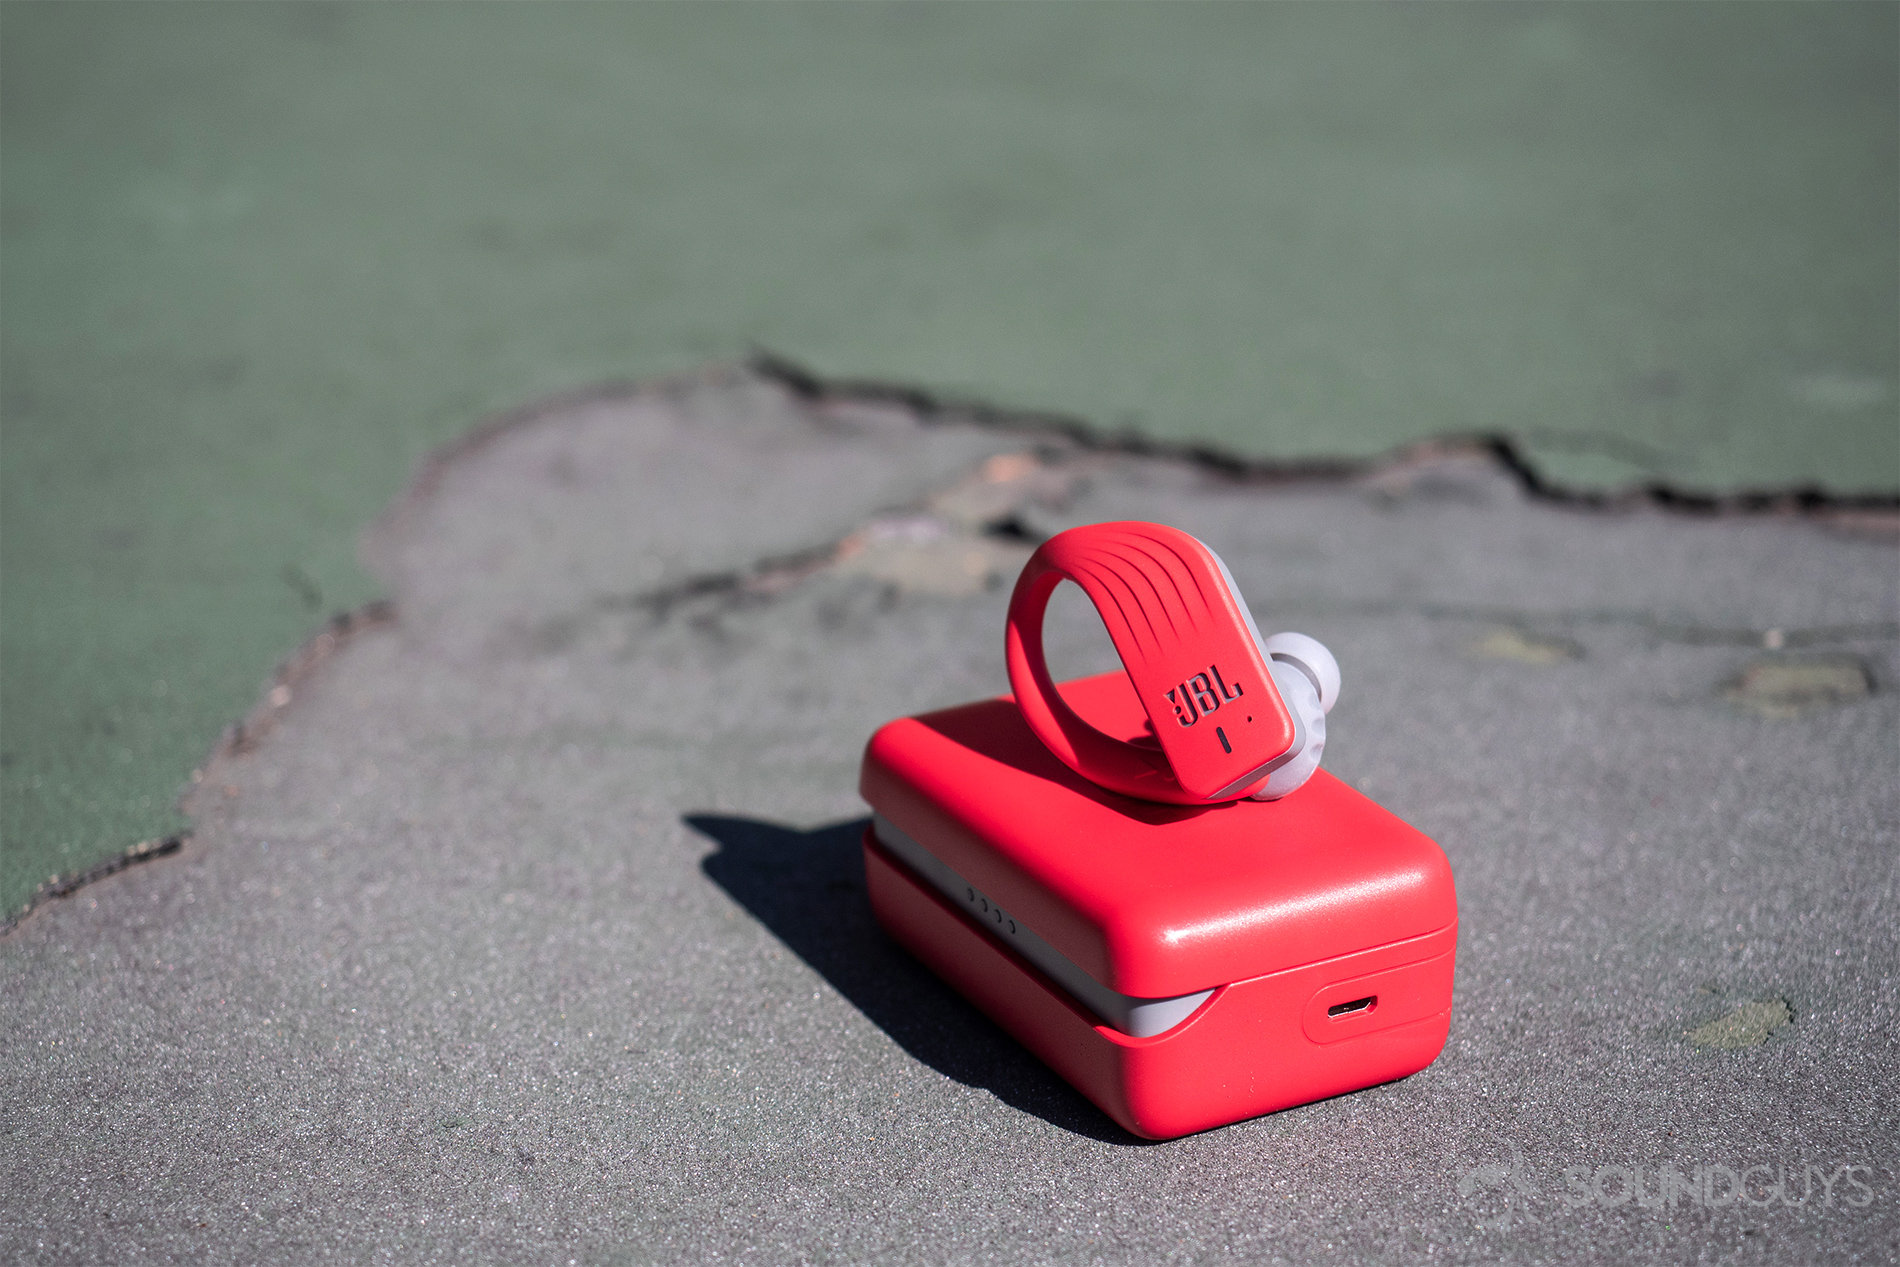 JBL Endurance Peak: The right earbud resting on the case, both of which are angled toward the camera and resting on a tennis court.